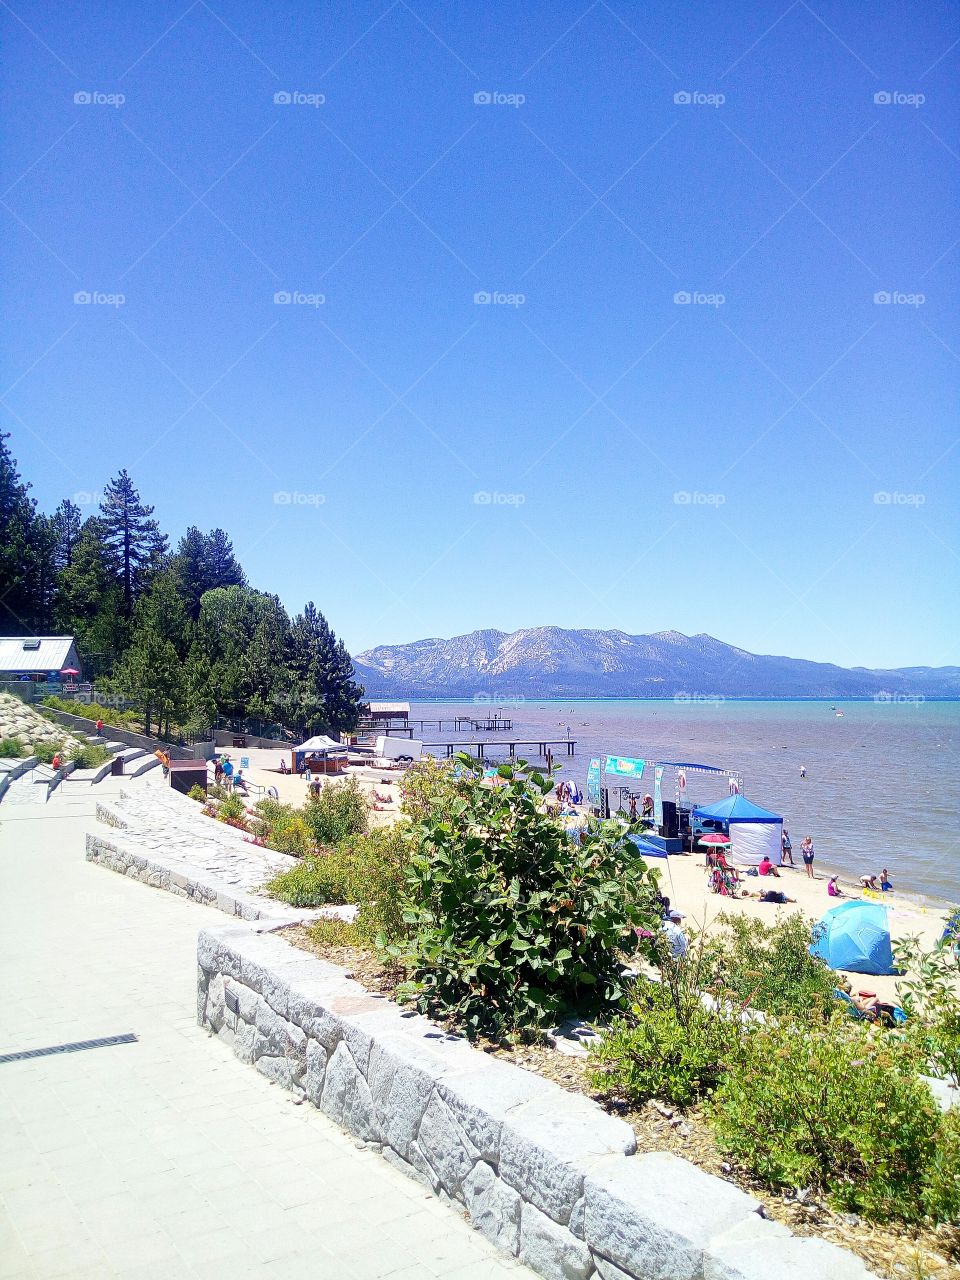 Breathtaking view of mountain and south lake Tahoe Beach.